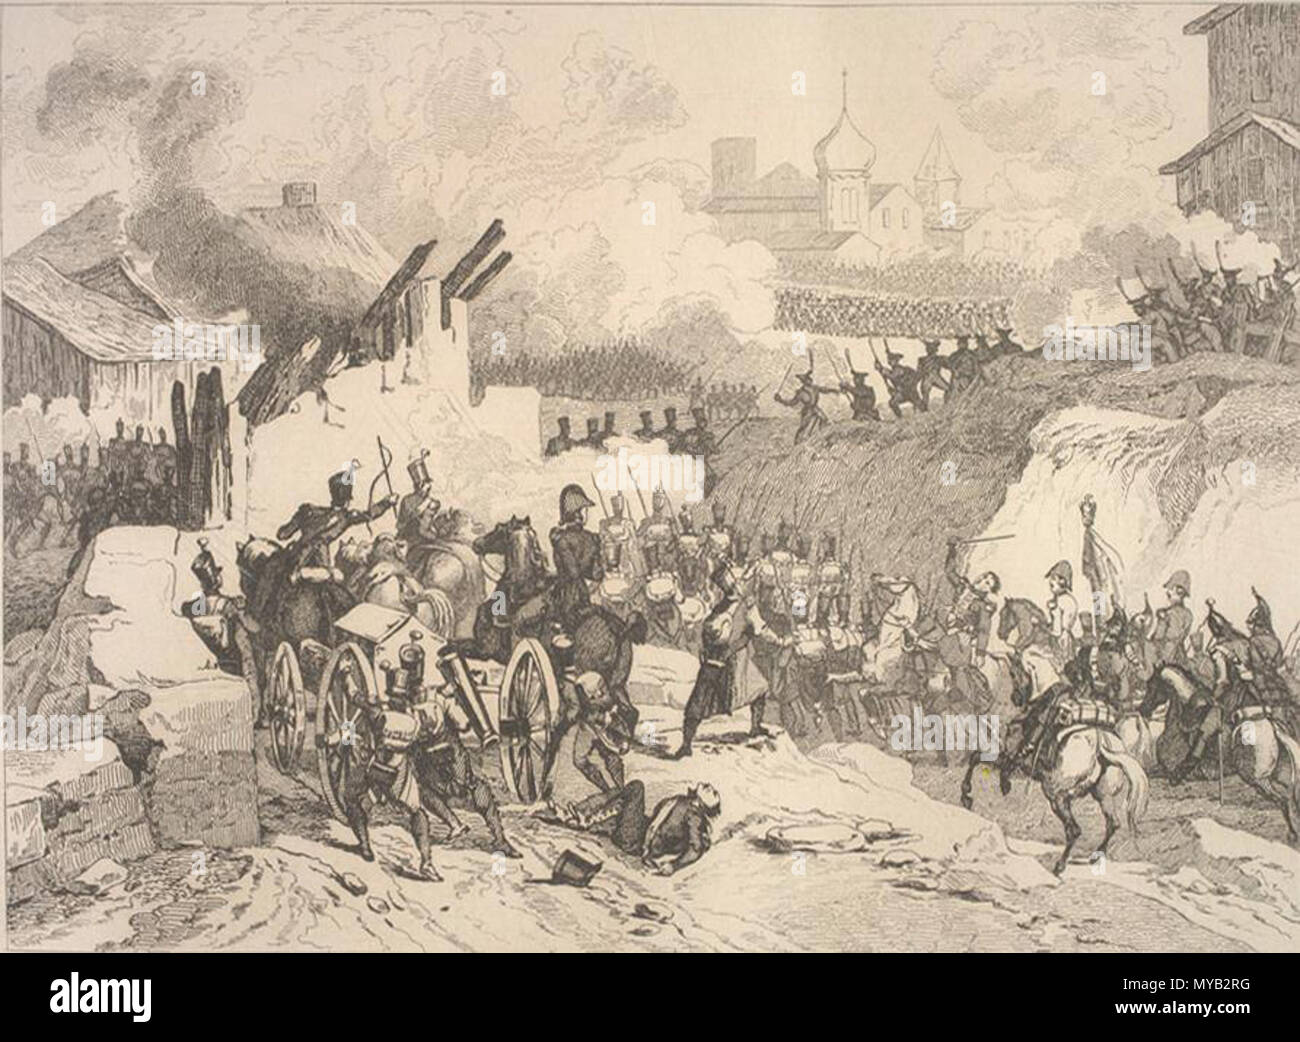 . Battle between Russian and French troops for Maloyaroslavets (Russia) on October, 24, part of the 1812 Napoleon Russian campaign. Title to drawing: Battle of Malo-jaroslawetz. [and] Death of General Delzons. From FRANCE MILITAIRE. // Martinet delt. // Réville sculpt // T. 19th century. artists: del. MARTINET, sc. RÉVILLE, Jean-Baptiste (1767-1825) 66 Battle of Maloyaroslavets 1812 by Martinet Stock Photo